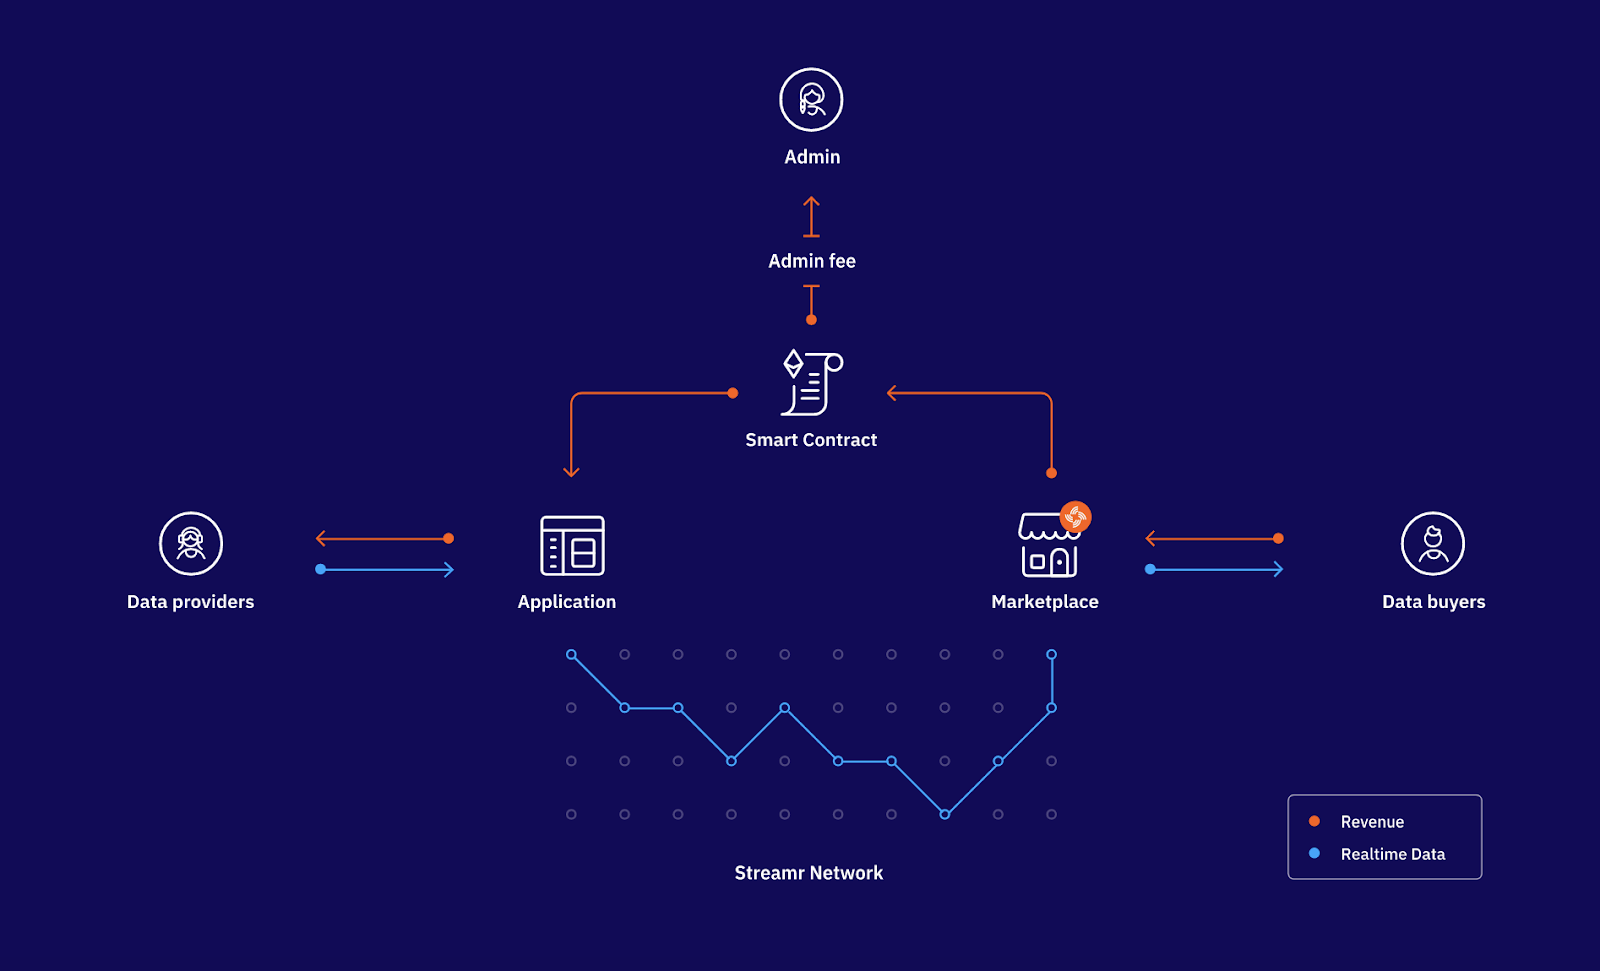 6 simple ways to earn with Streamr